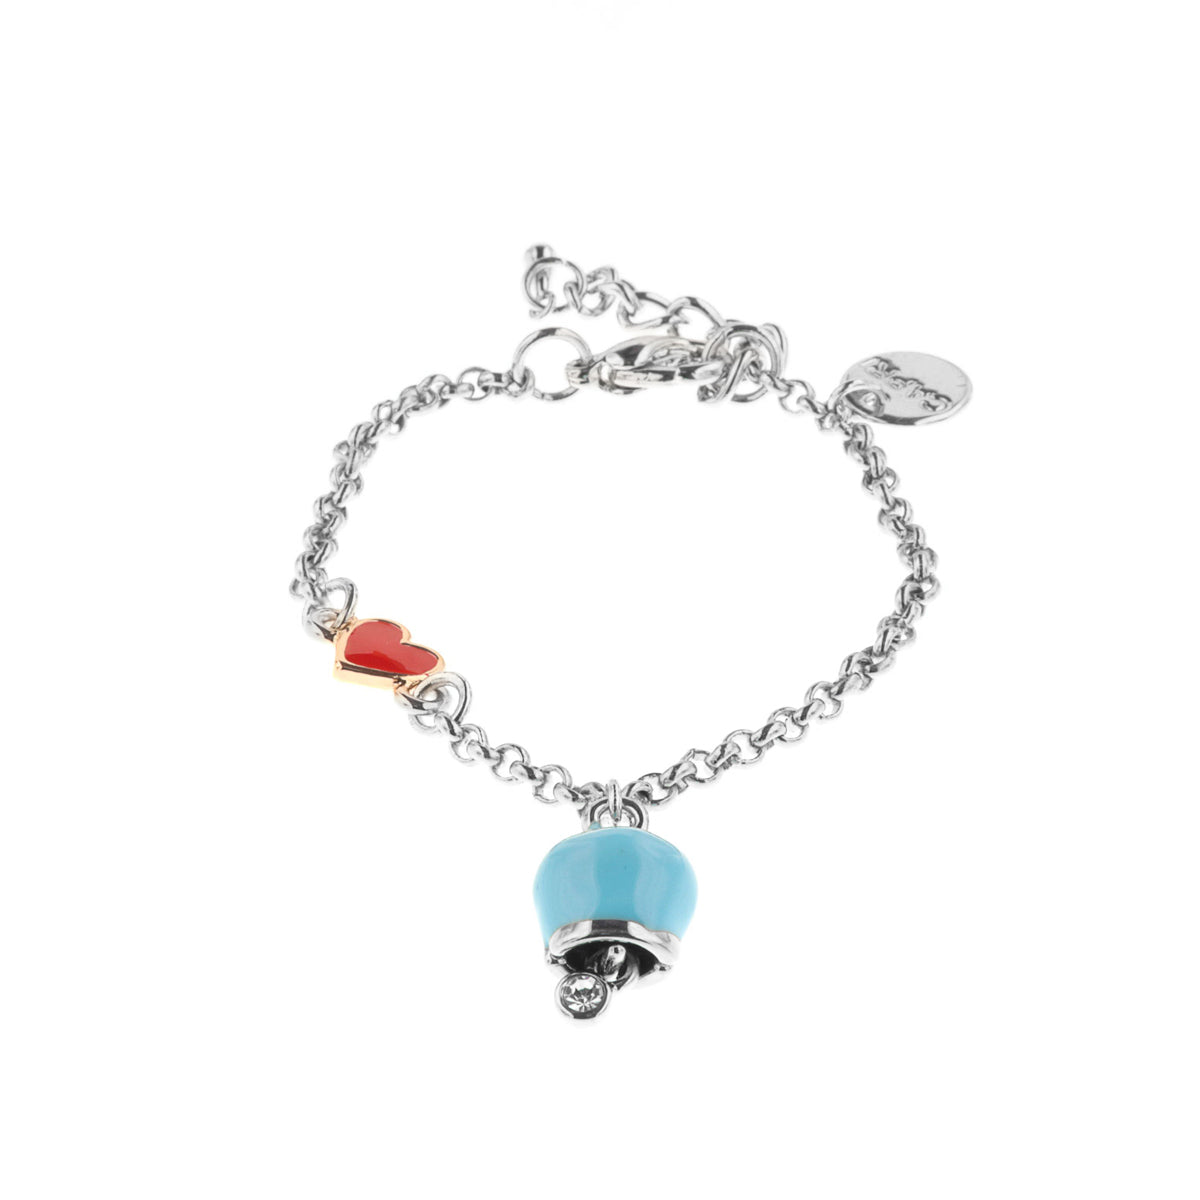 Metal bracelet with bell nogging blue changing and pendant in the shape of a red glazed heart shape and detail